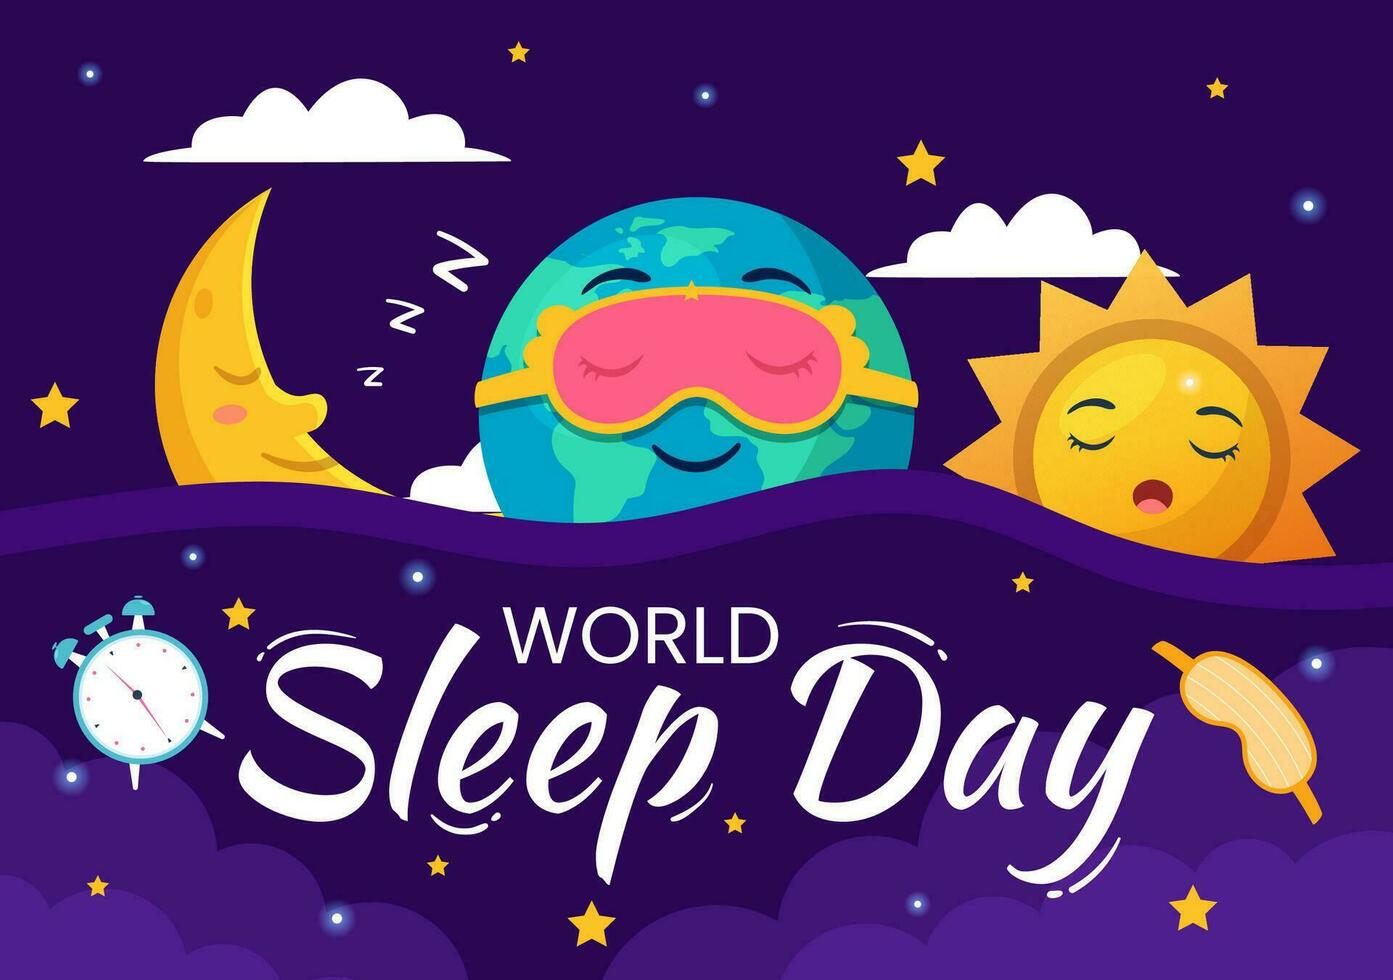 World Sleep Day Vector Illustration on March 17 with People Sleeping, Clouds, Planet Earth and the Moon in Sky Backgrounds Flat Cartoon Design